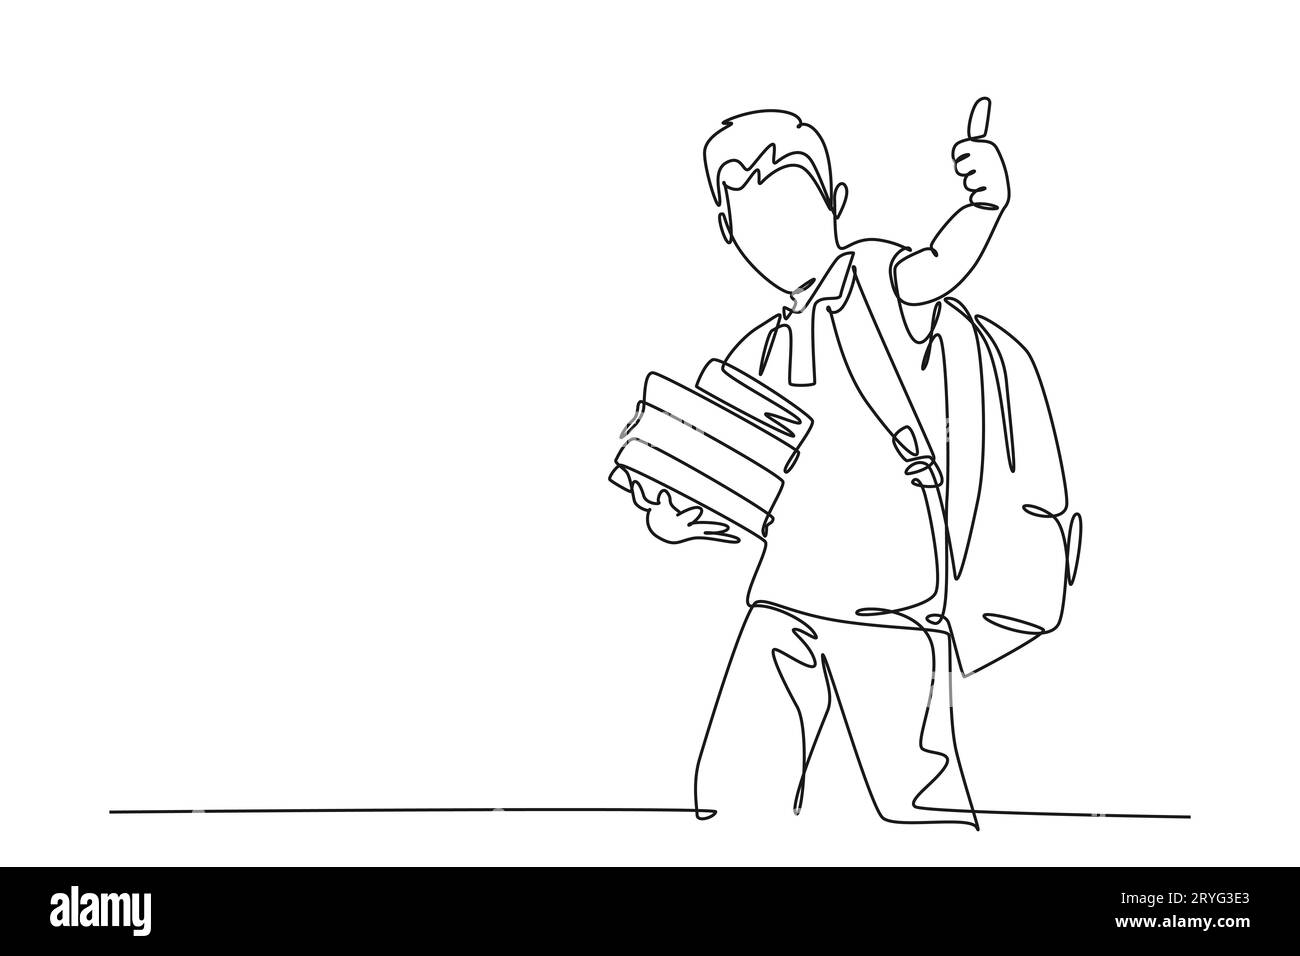 Single continuous line drawing young happy elementary school boy student carrying stack of books and giving thumbs up gesture. Kids education concept. Stock Photo